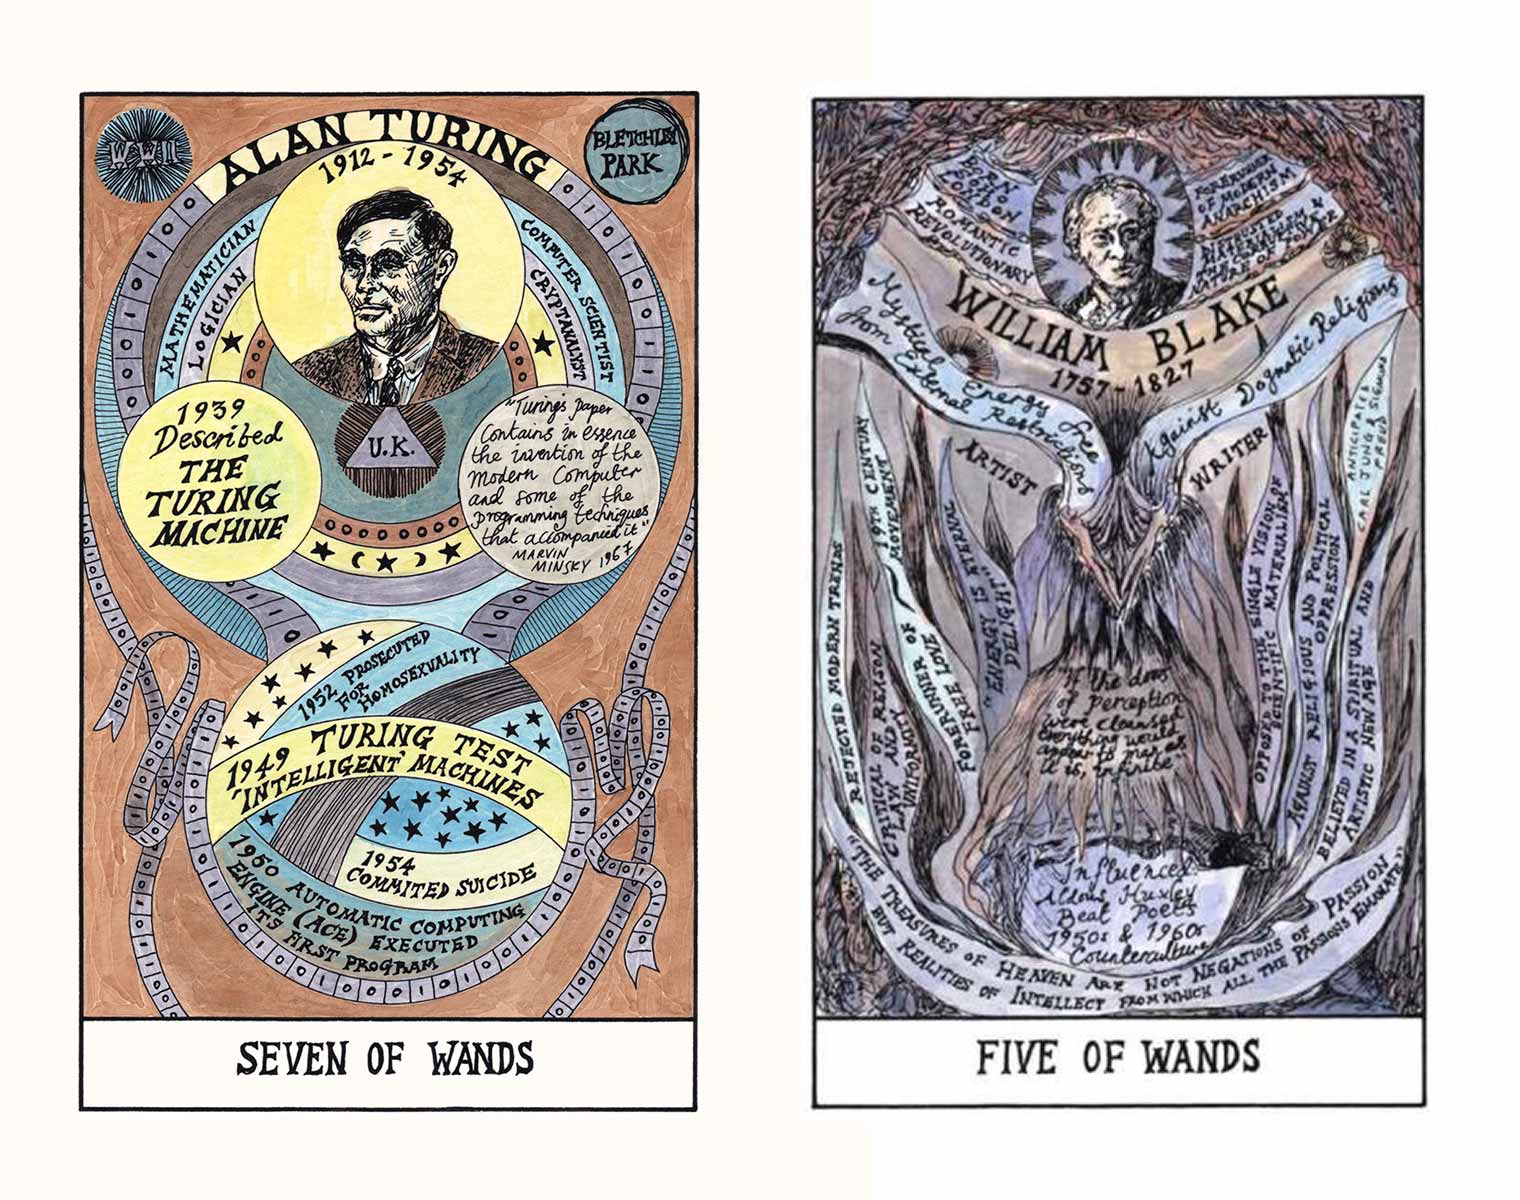 William Blake's head in a colorful five of wands tarot card